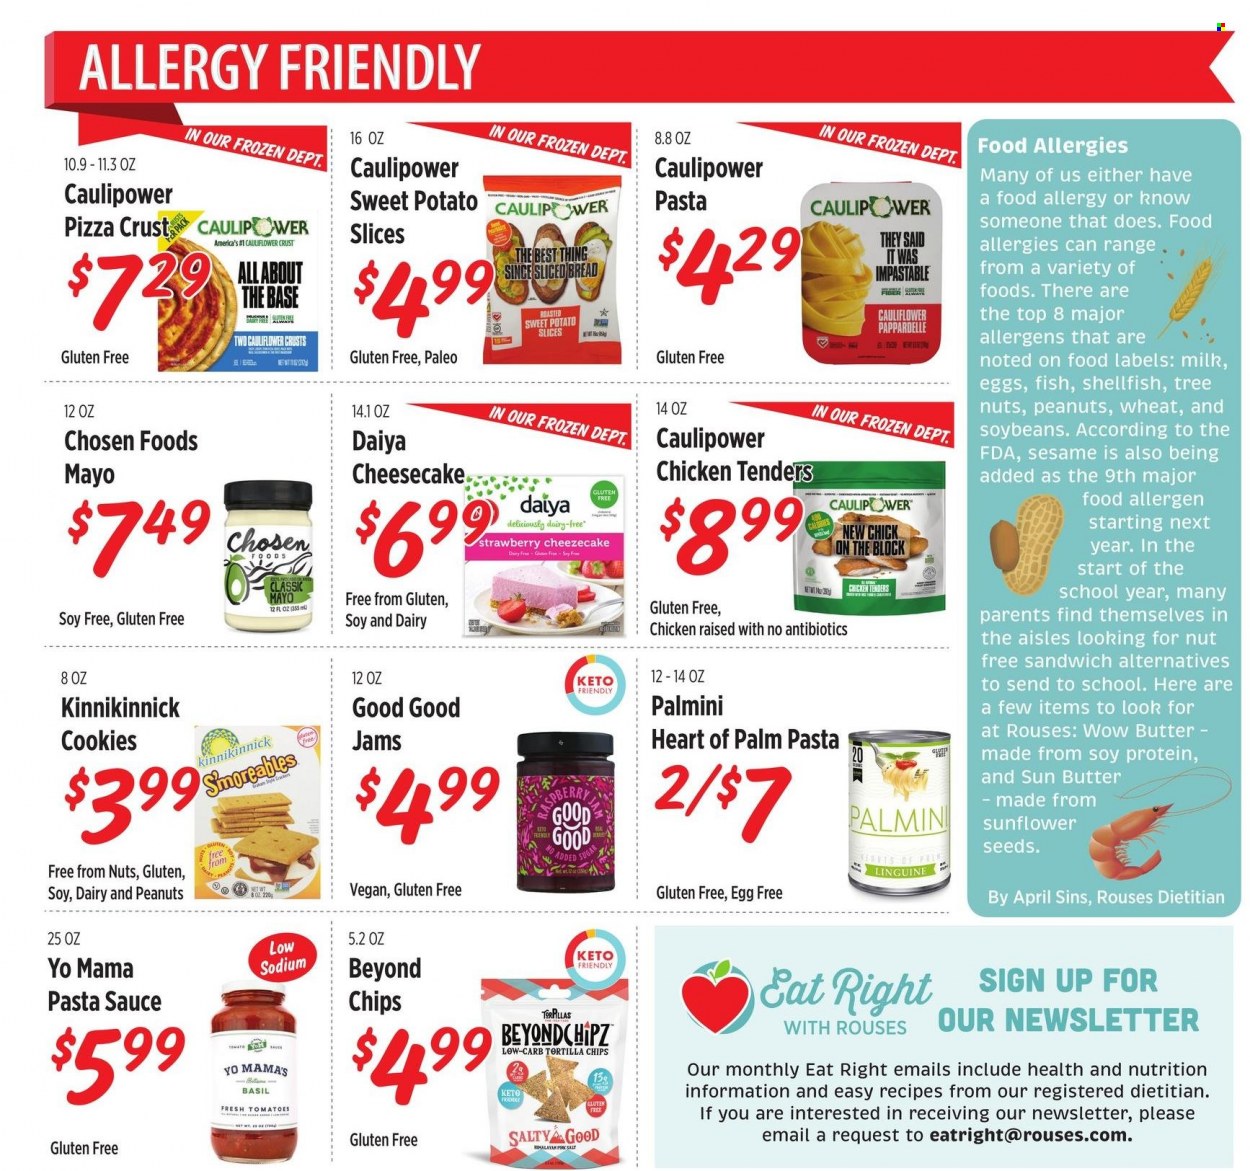 Rouses Markets ad  - 08.03.2022 - 08.31.2022.